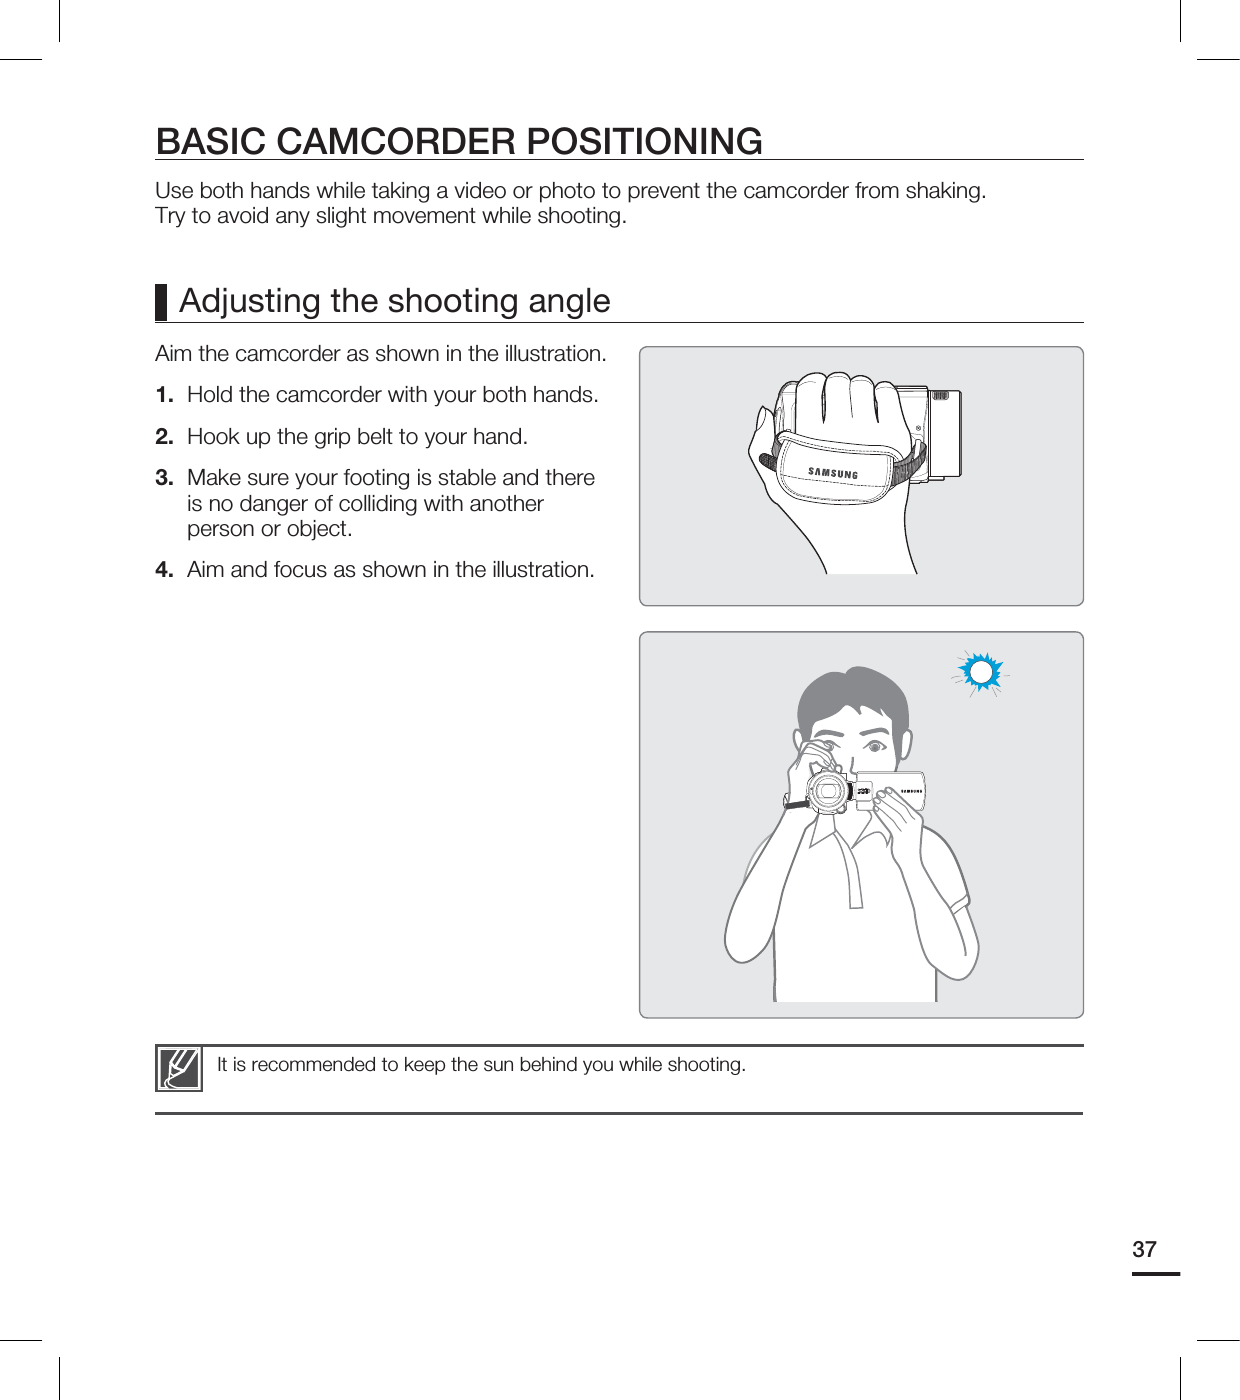 37BASIC CAMCORDER POSITIONINGUse both hands while taking a video or photo to prevent the camcorder from shaking.Try to avoid any slight movement while shooting.Aim the camcorder as shown in the illustration.1.  Hold the camcorder with your both hands.2.  Hook up the grip belt to your hand.3.  Make sure your footing is stable and there is no danger of colliding with another person or object.4.  Aim and focus as shown in the illustration.It is recommended to keep the sun behind you while shooting.Adjusting the shooting angle